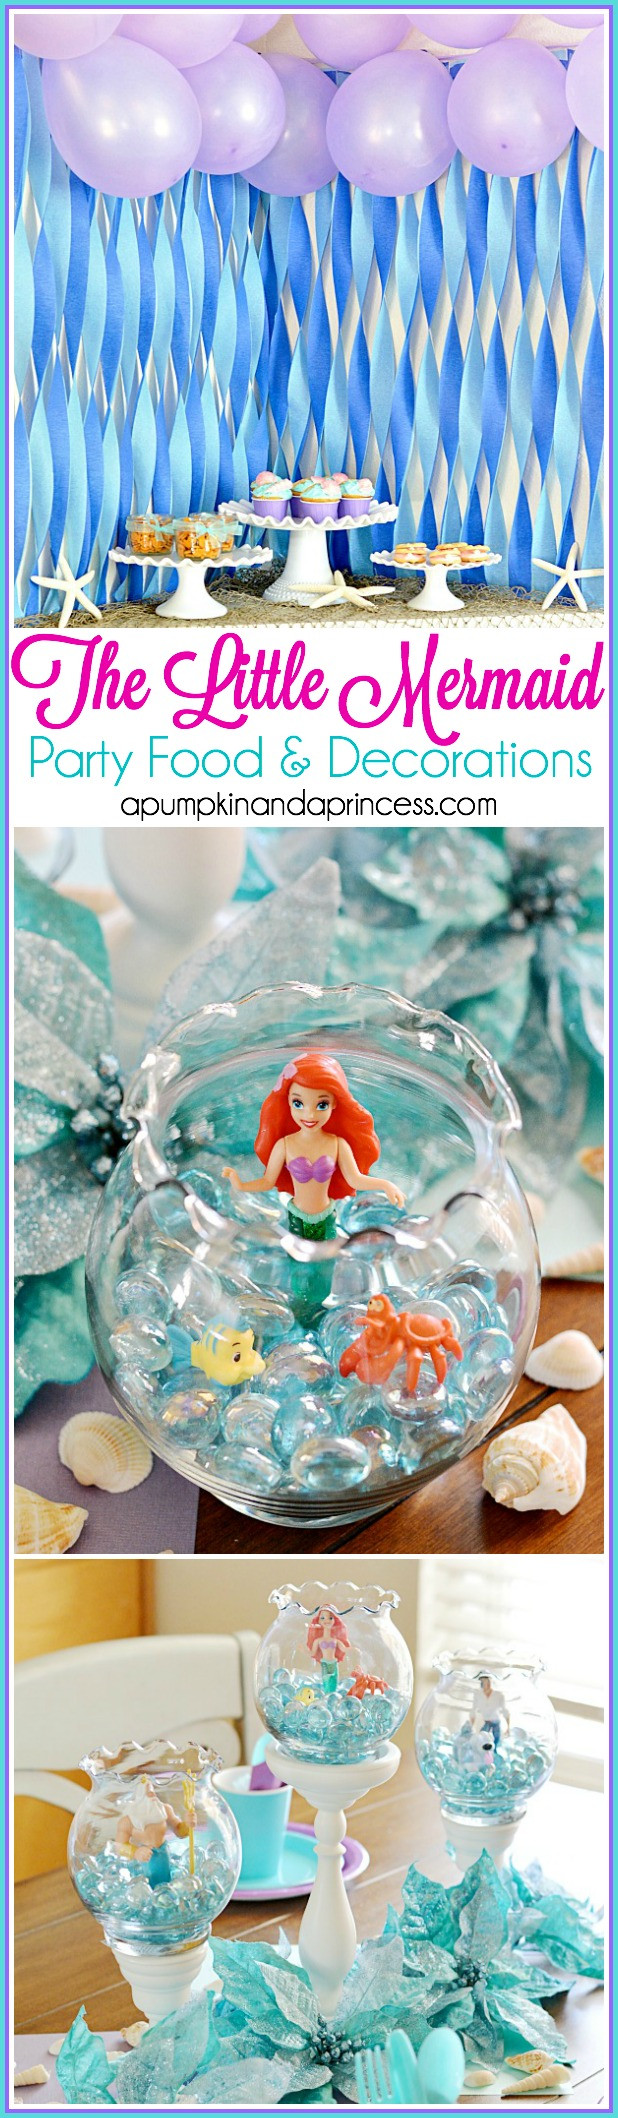 Mermaid Party Decorations Ideas
 The Little Mermaid Party A Pumpkin And A Princess